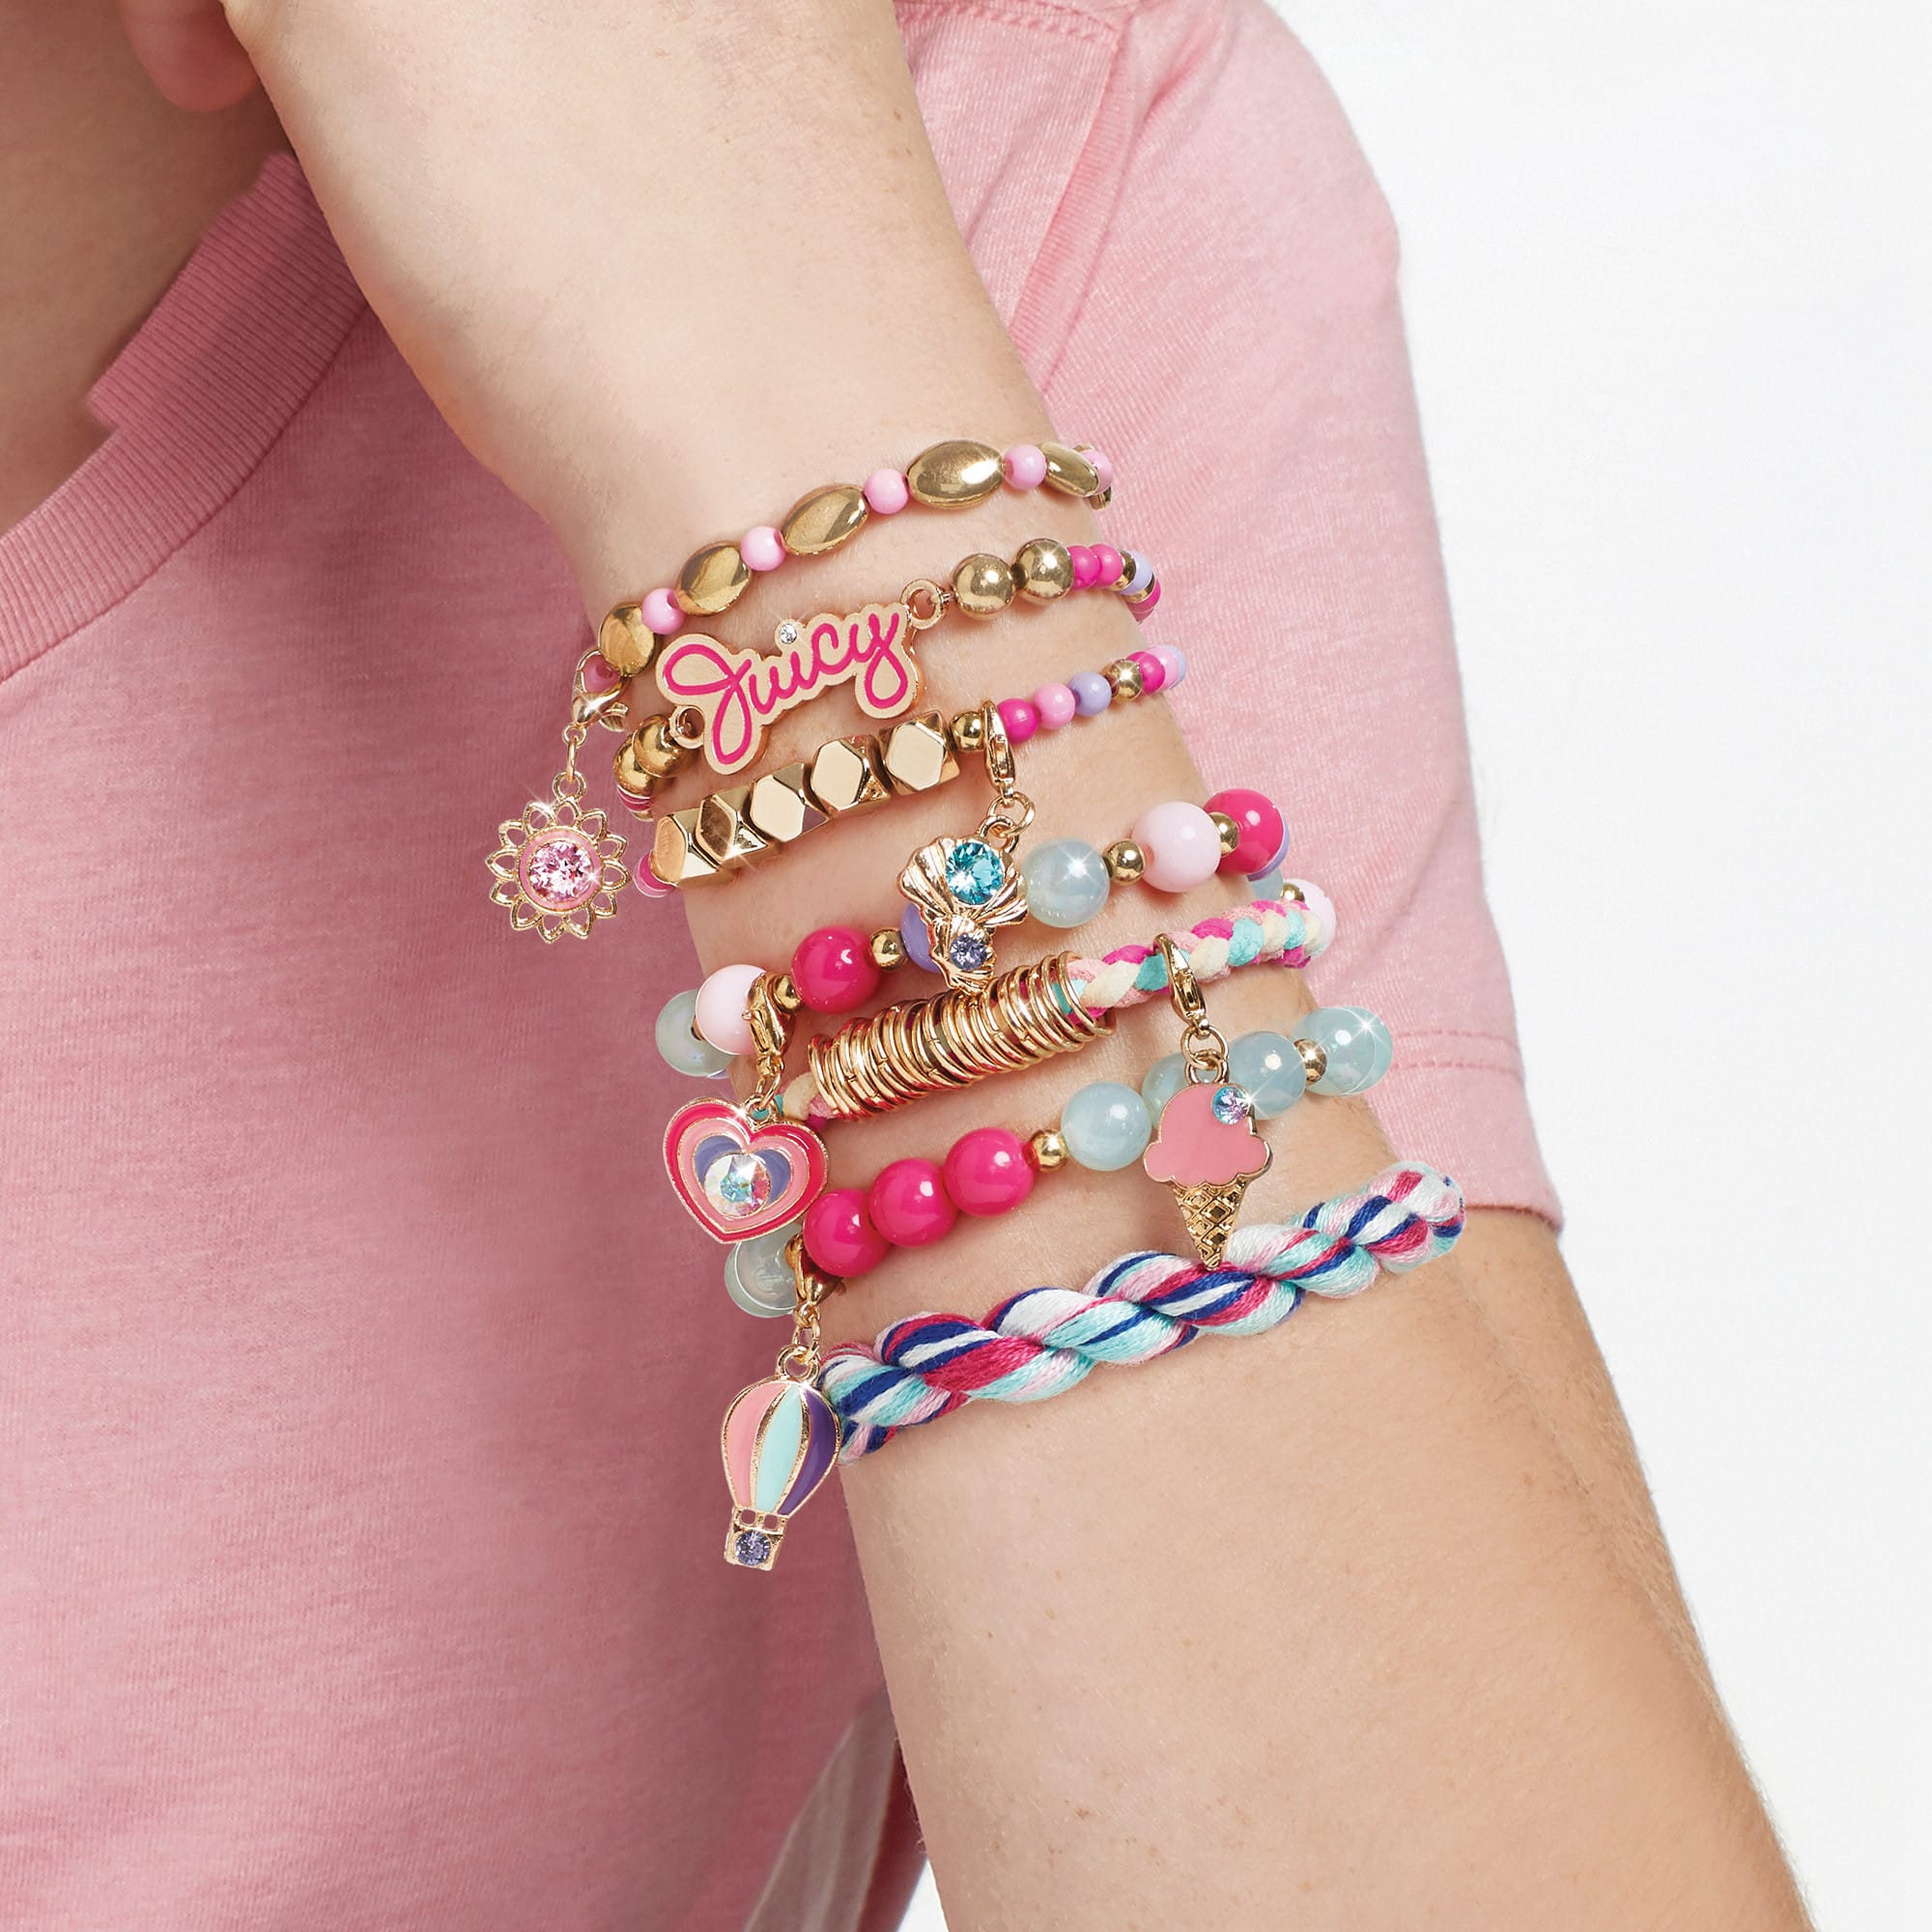 Make It Real - Juicy Couture - Crystal Sunshine Bracelets with Swarovski Crystals